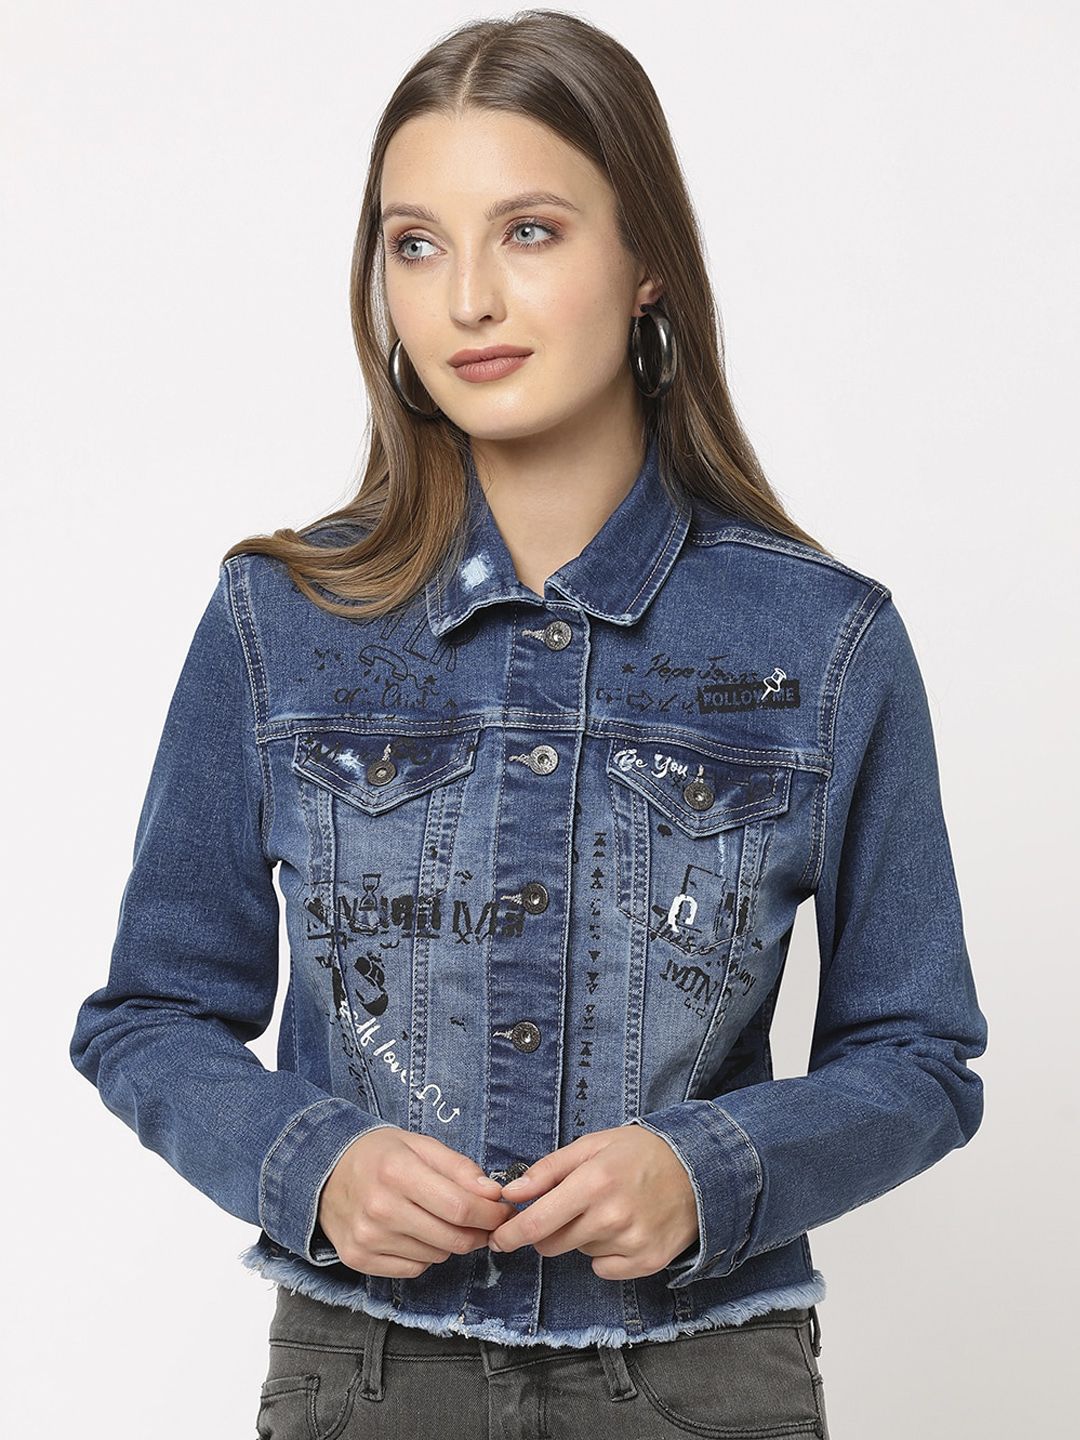 Pepe Jeans Women Blue Washed Denim Jacket Price in India